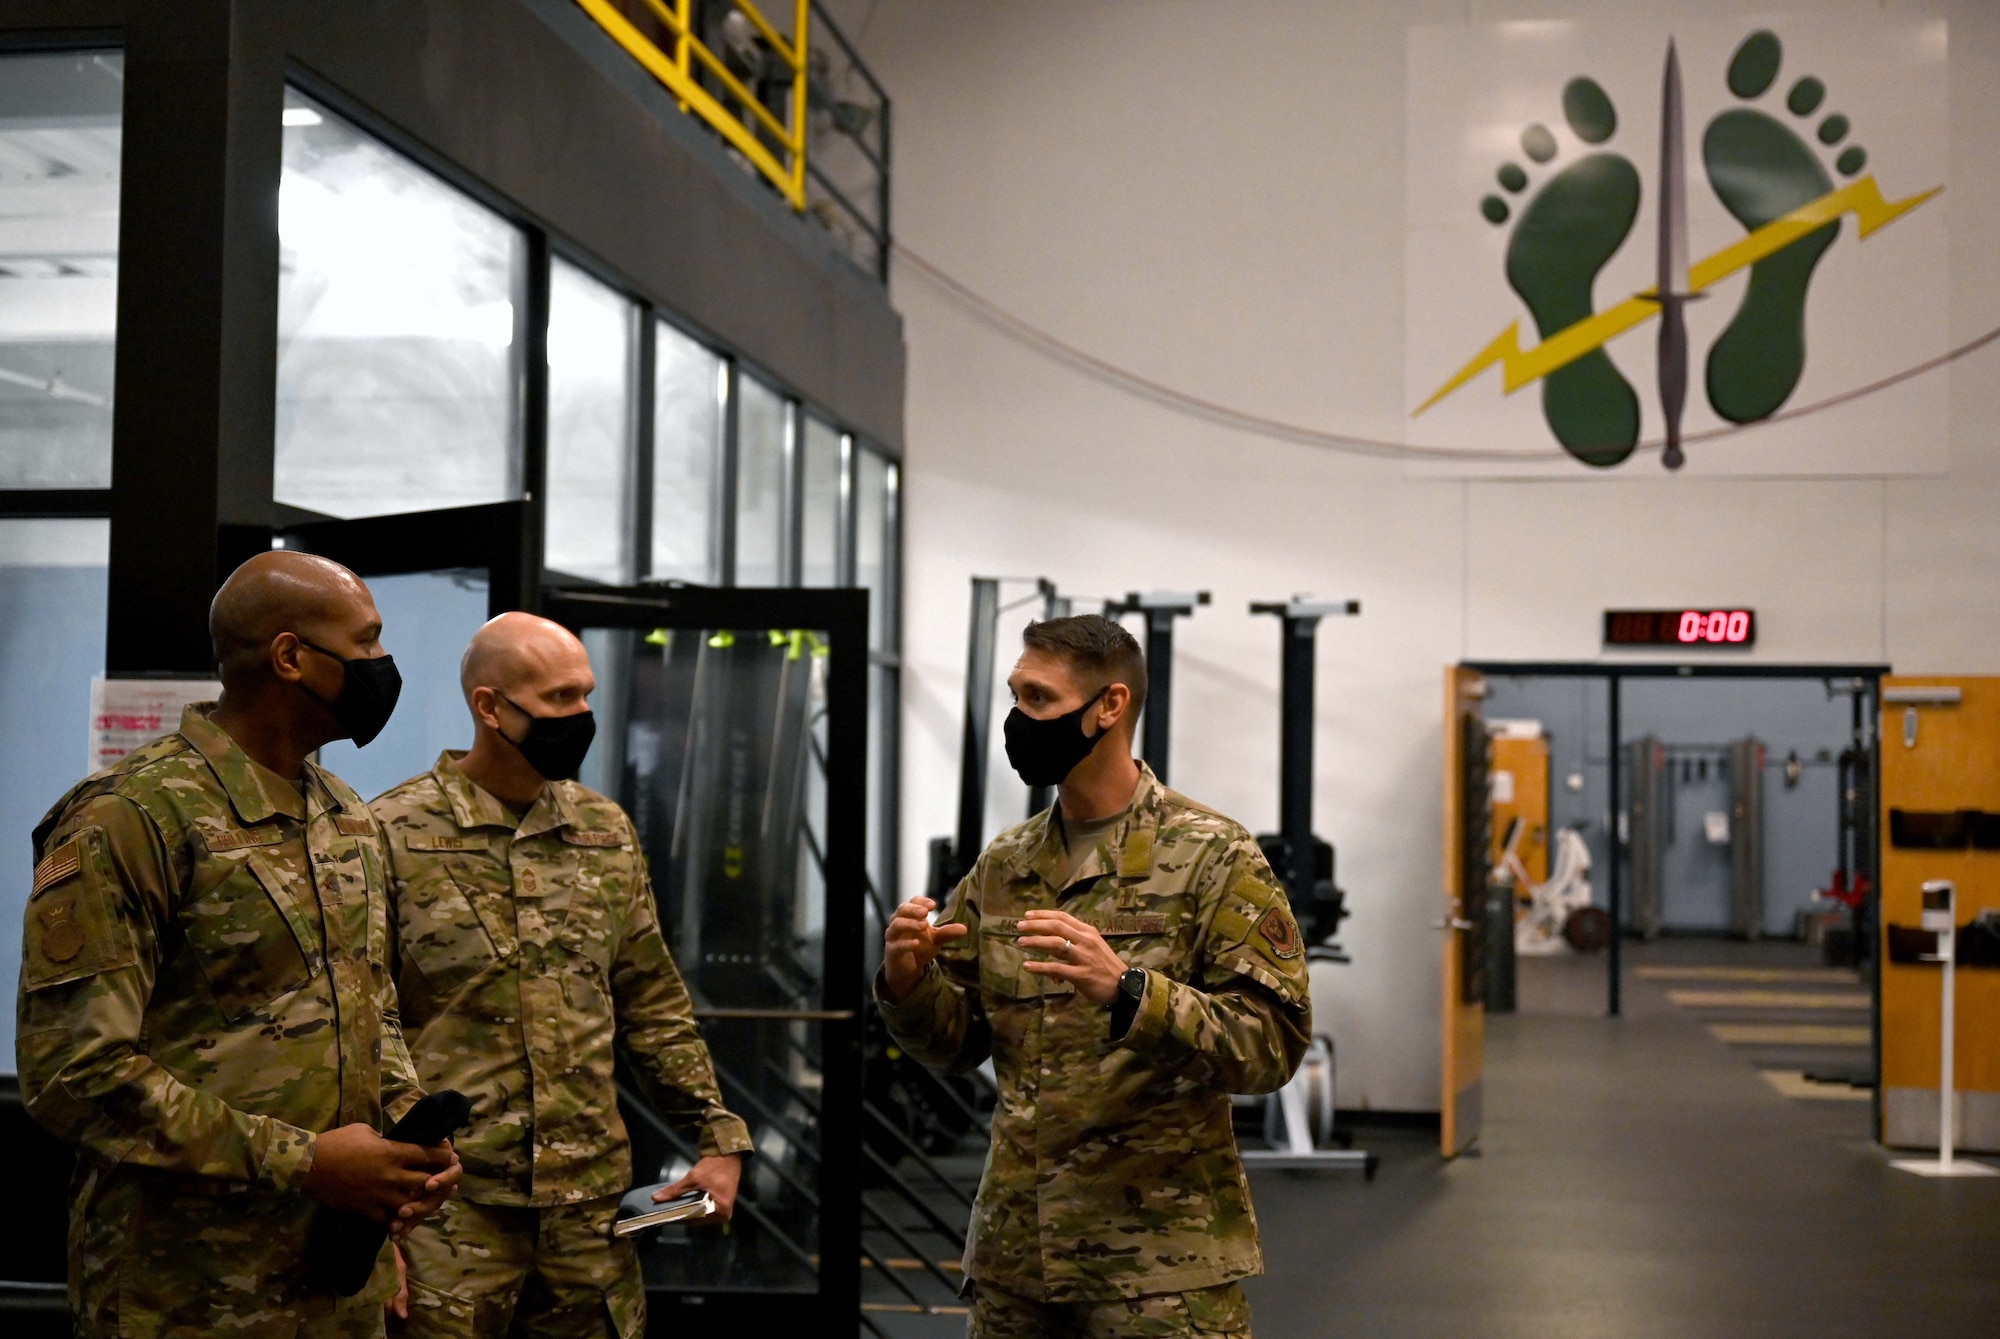 Brigadier General Roy Collins, left, director of Security Forces, deputy chief of staff for Logistics, Engineering and Force Protection, and Chief Master Sgt. Brian Lewis, Security Forces career field manager, receive a brief on the 23rd Special Tactics Squadron’s fitness and rehabilitation facility from Maj. Kyle East, 23rd STS physical therapist, during their visit to Hurlburt Field, Fla., Jan. 11, 2021. During the tour, Collins and Lewis were briefed on the Deployed Aircraft Ground Response Element (DAGRE) training process, took part in a lasershot demonstration, and visited the 23rd STS compound for a mission briefing and a walk around the unit’s multilevel training and fitness facilities. (U.S. Air Force photo by Senior Airman Brandon Esau)